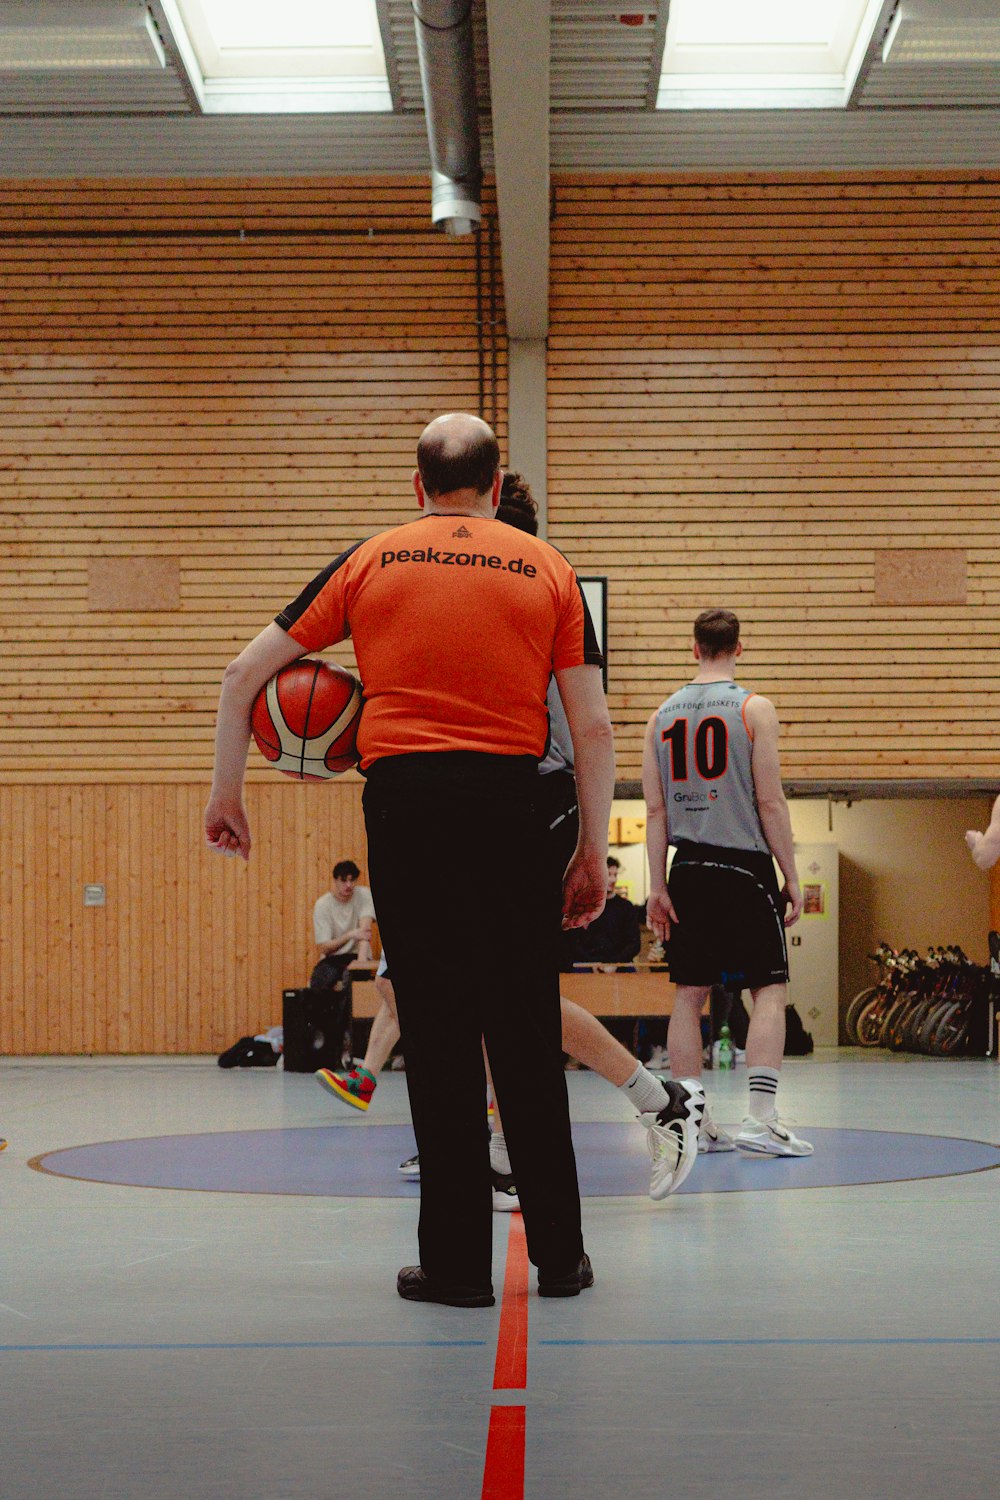 a man in an orange shirt is holding a basketball